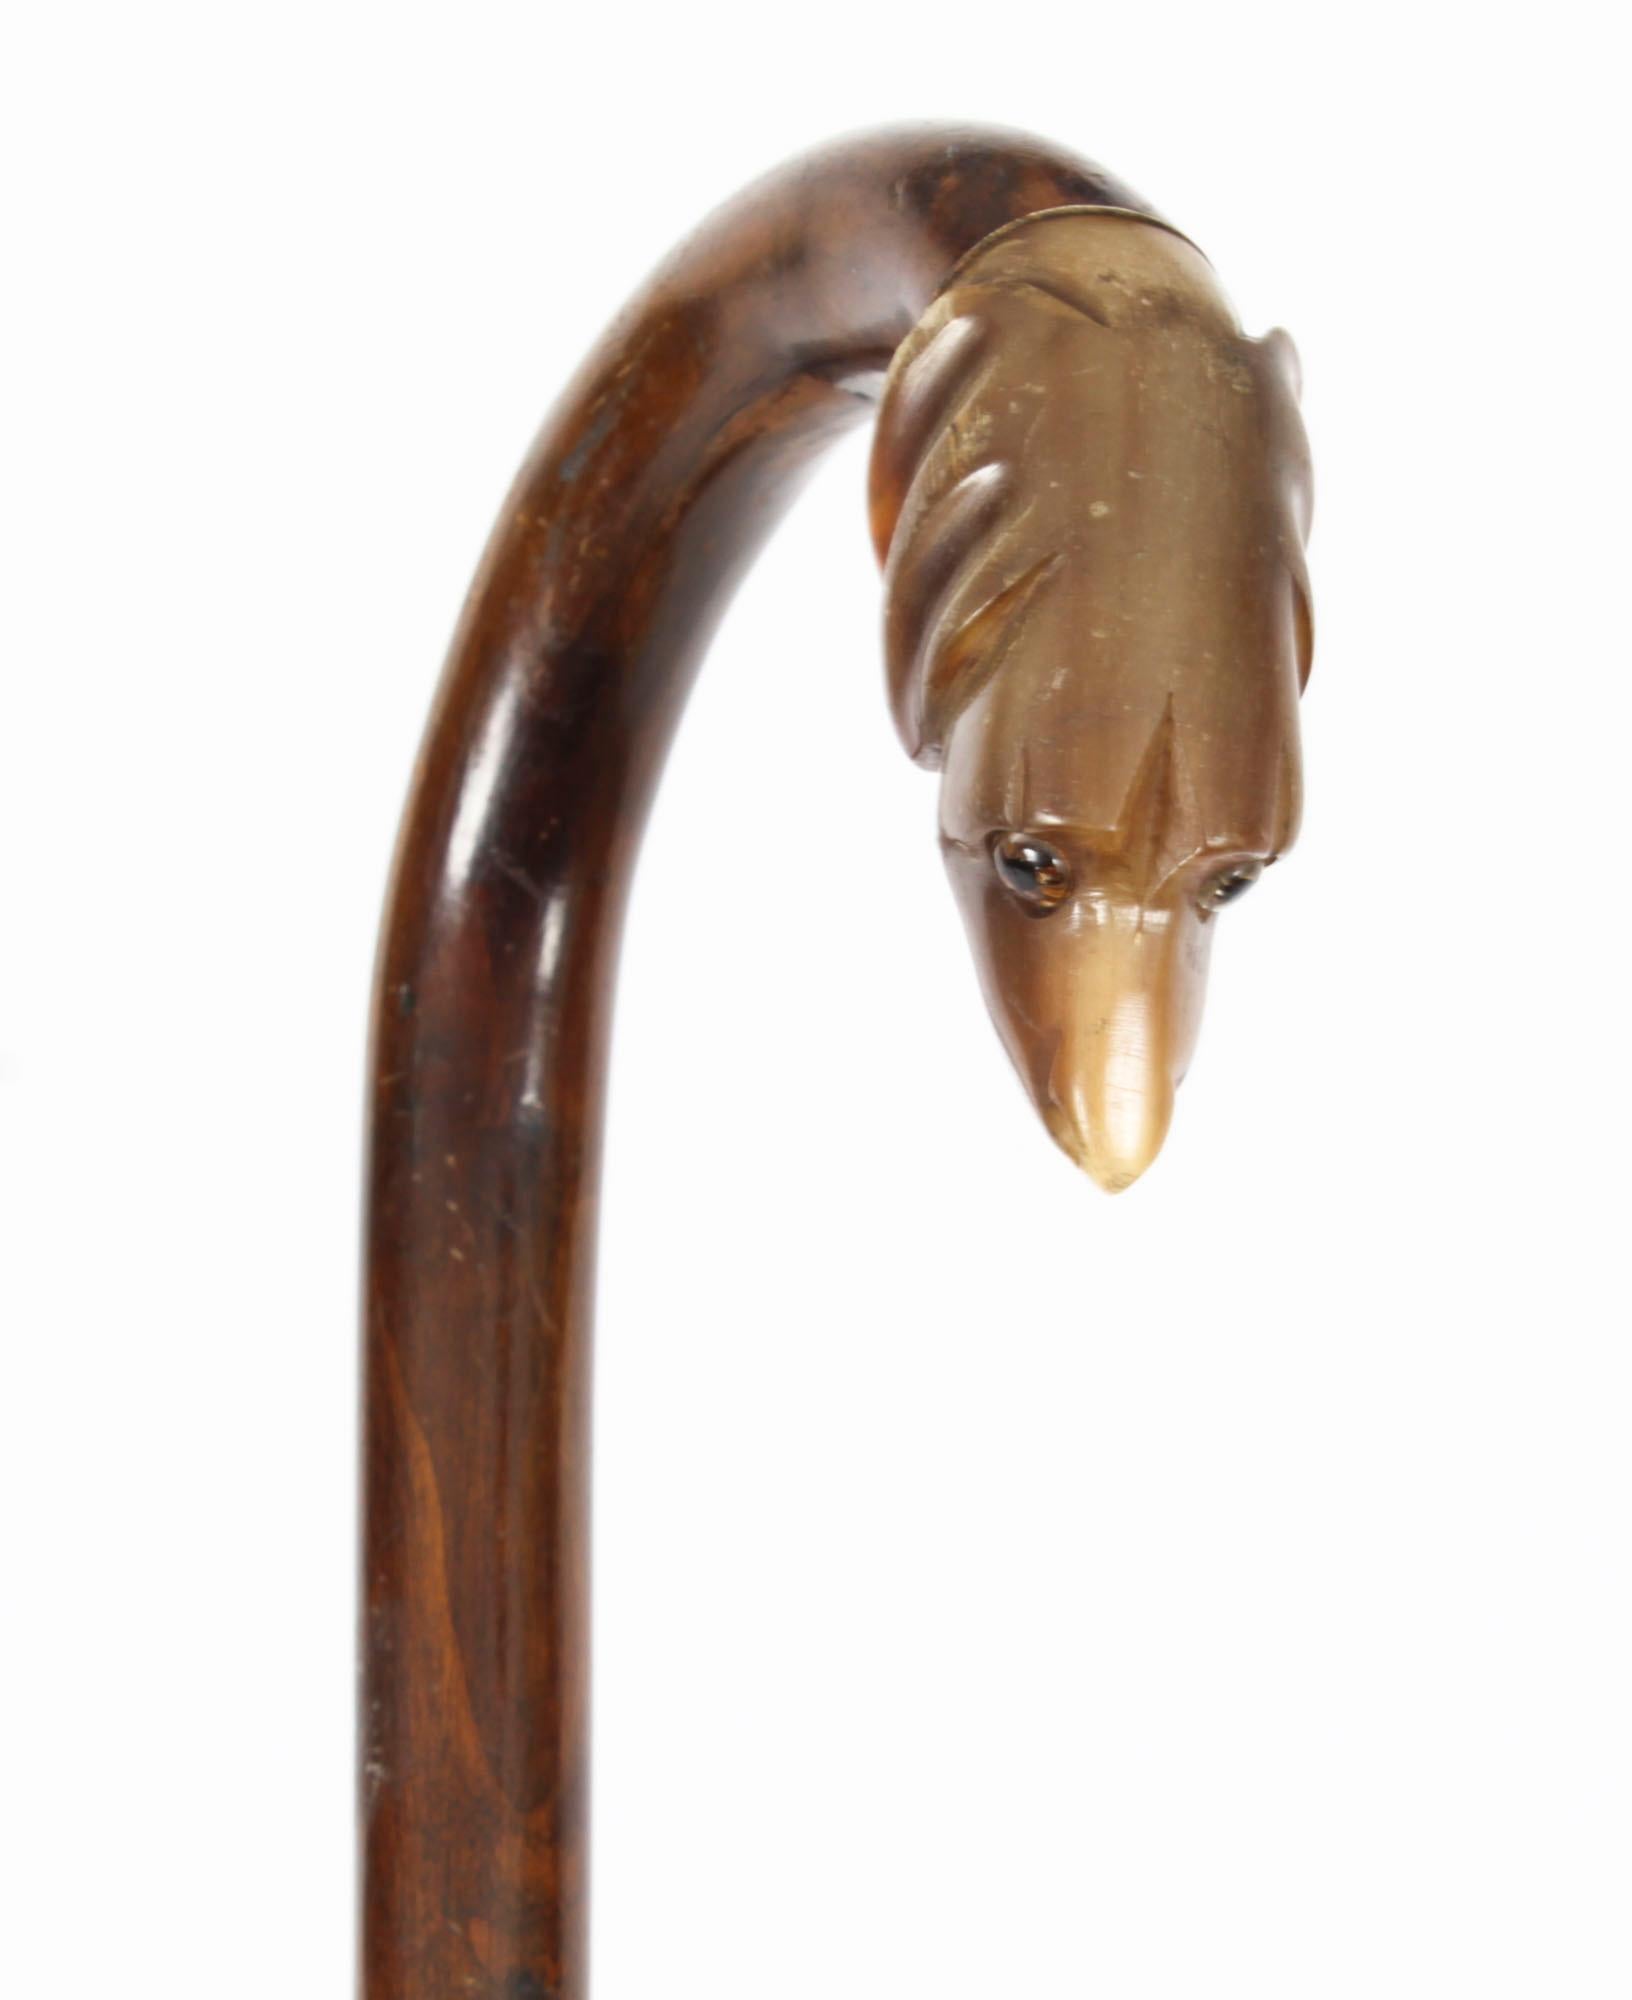 Wood Antique Walking Stick Cane with Horn Dog Handle, Late 19th Century